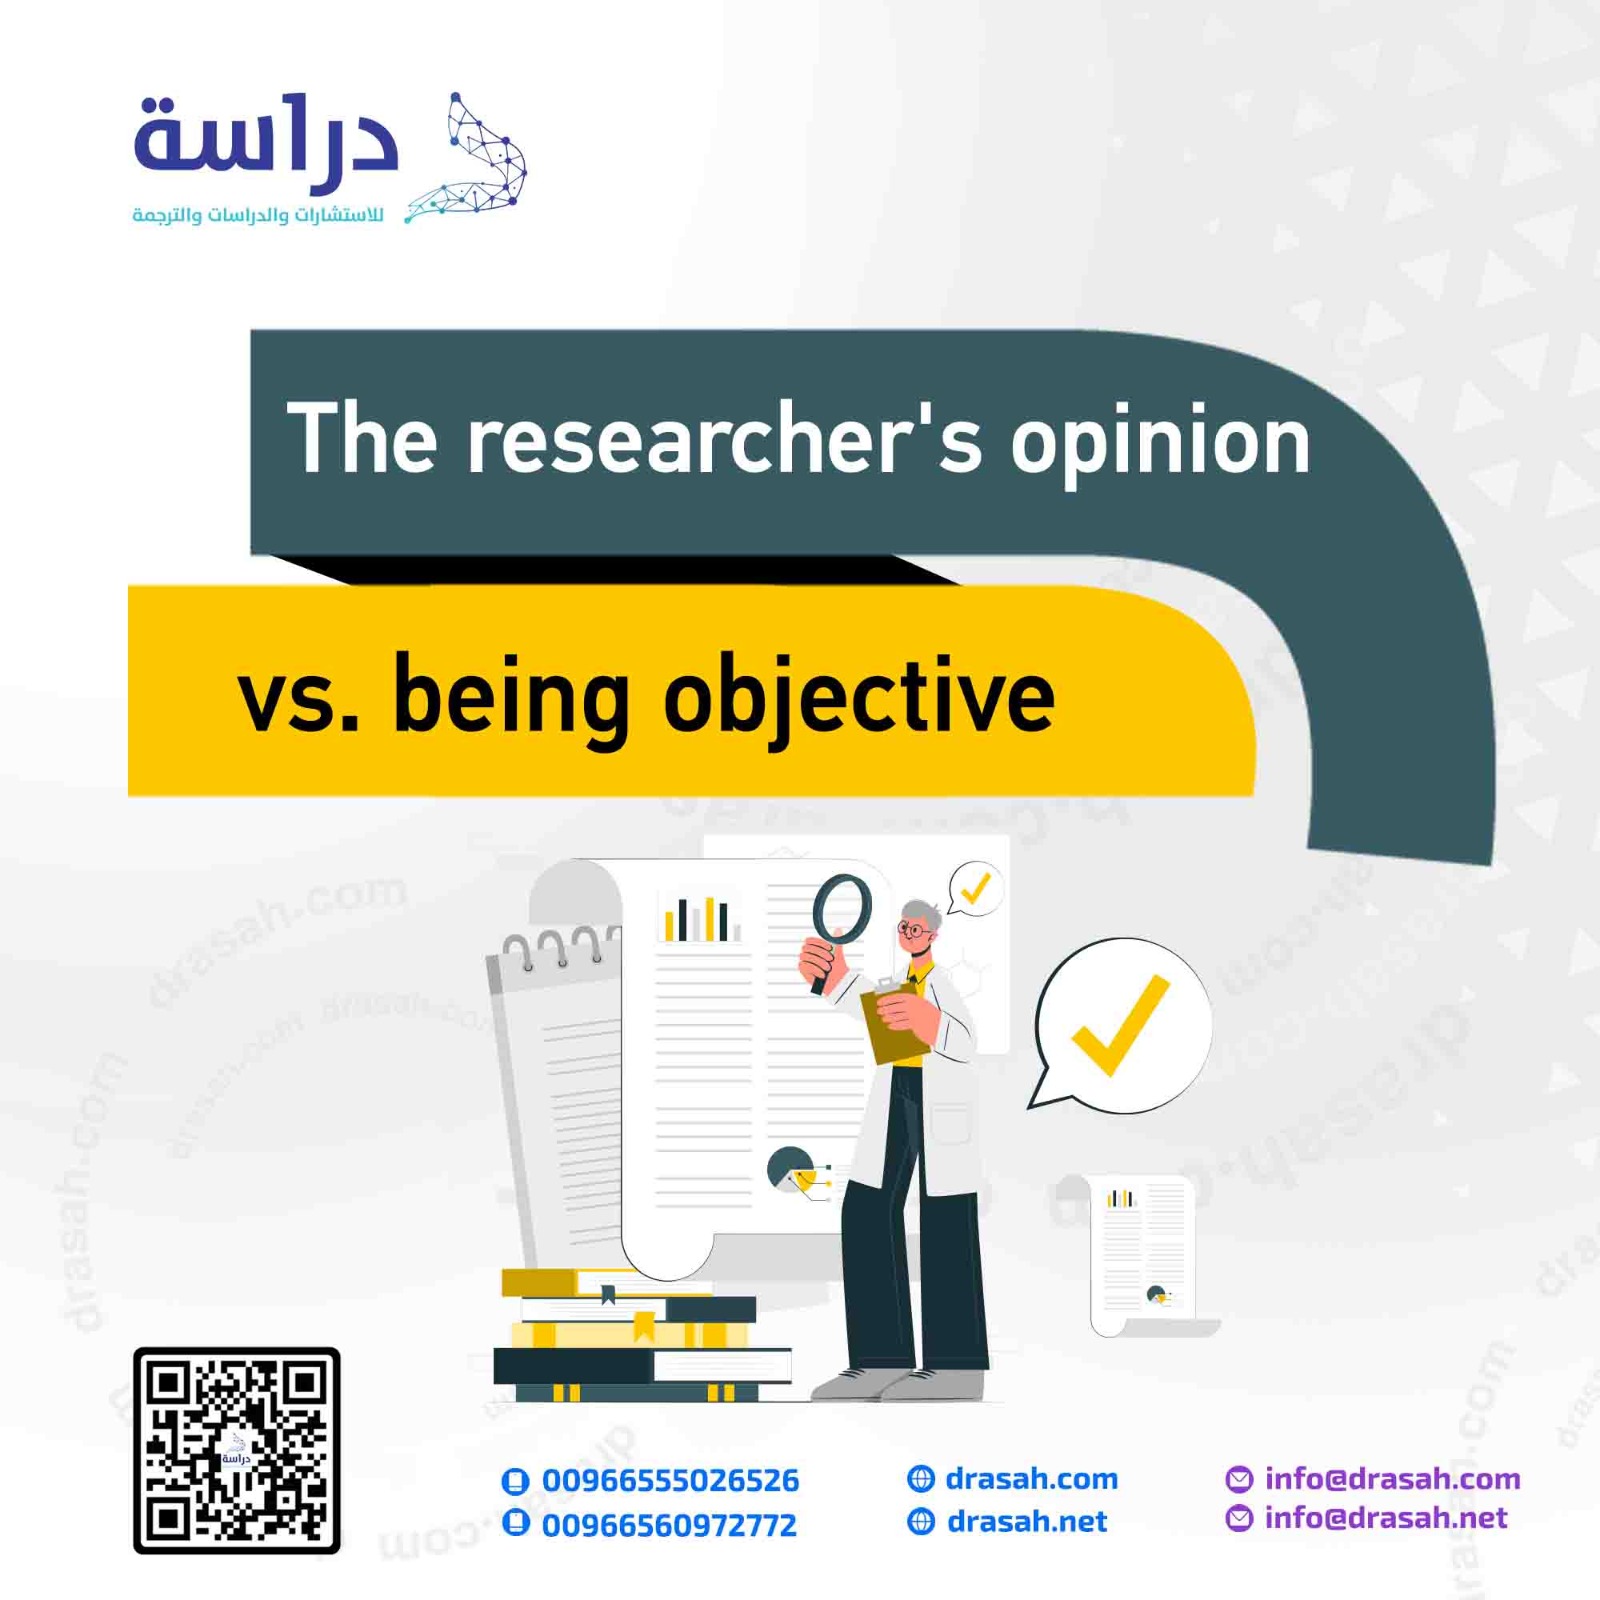 The researcher's opinion vs. being objective